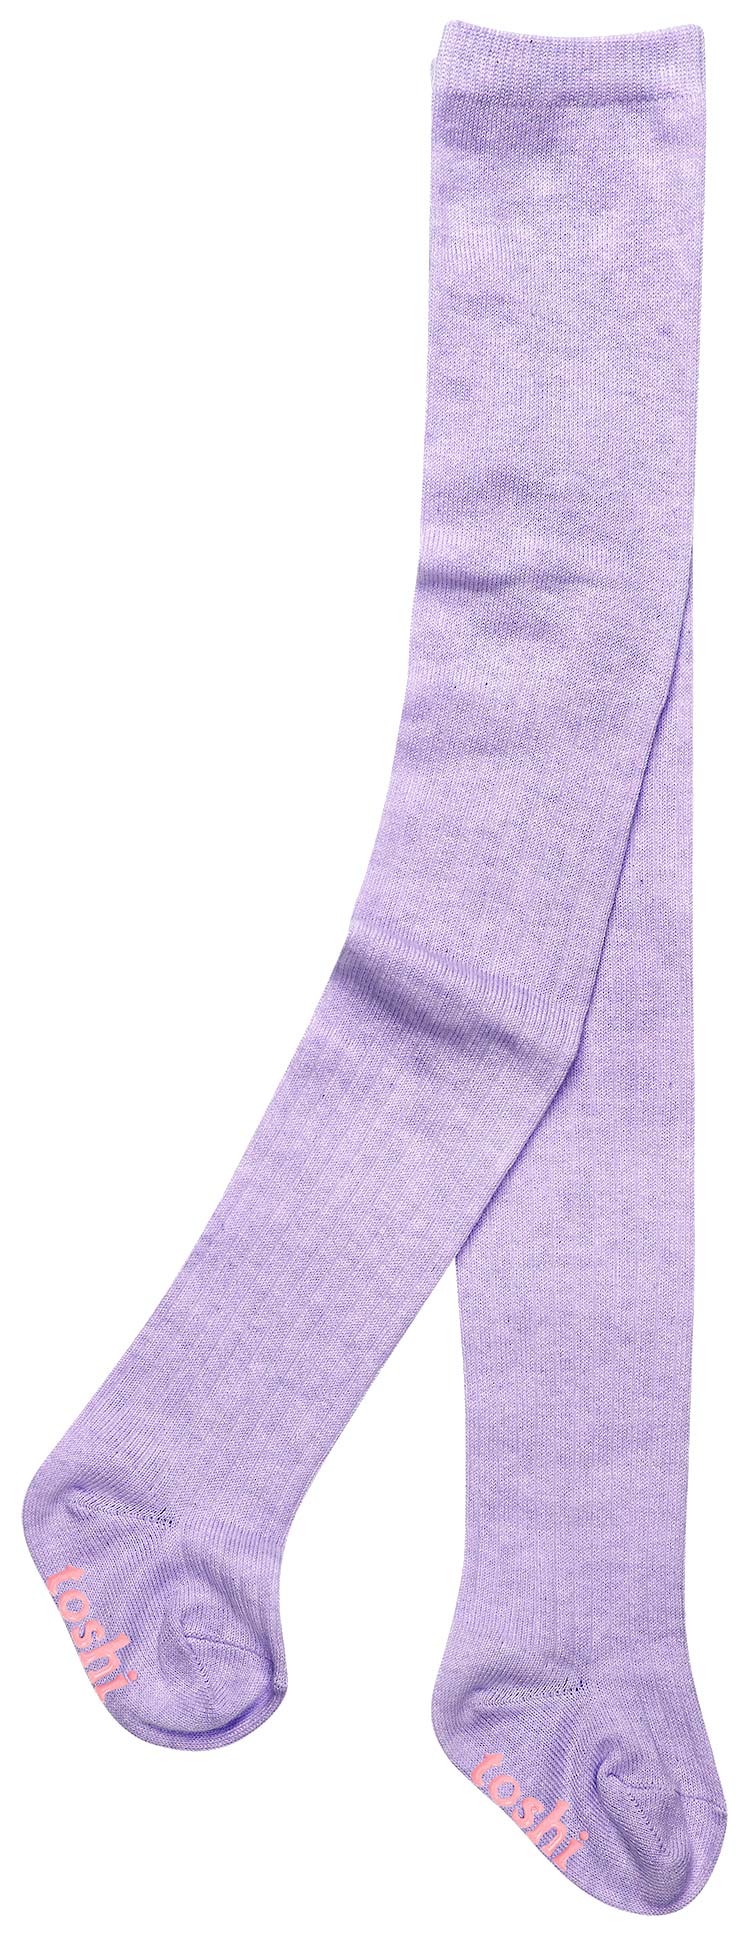 Organic Tights Footed Dreamtime Amethyst-Clothing & Accessories-Toshi-The Bay Room